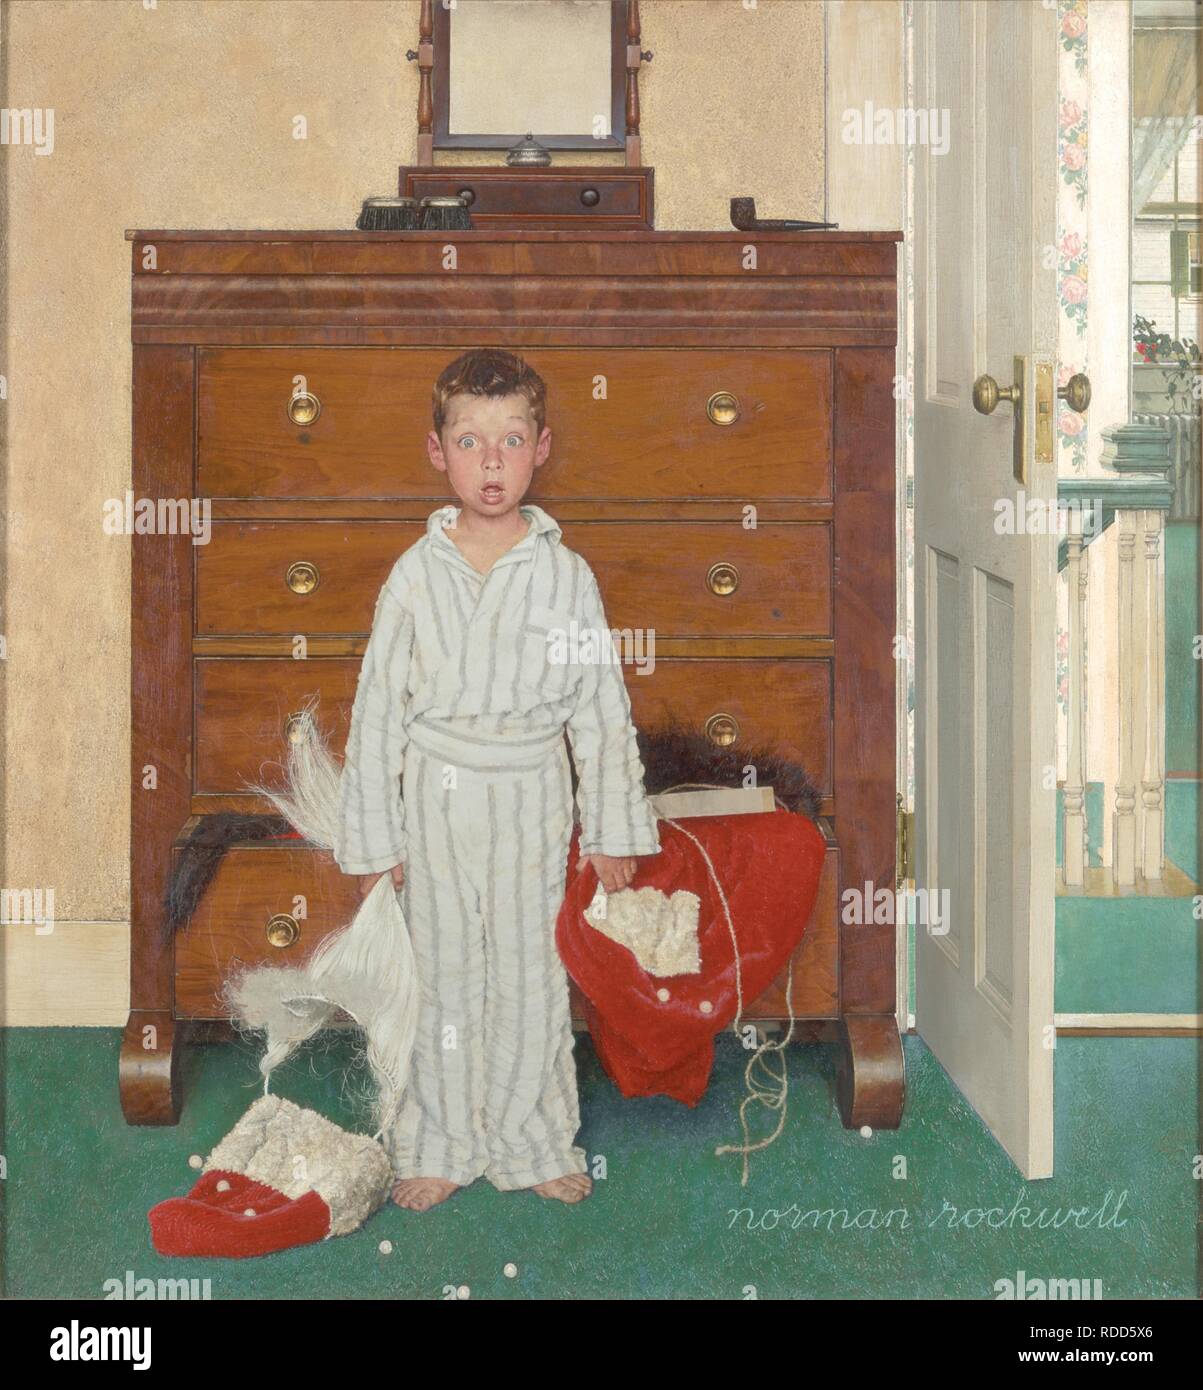 Dressmaker, 1931 by Norman Rockwell - Paper Print - Norman Rockwell Museum  Custom Prints - Custom Prints and Framing From the Norman Rockwell Museum